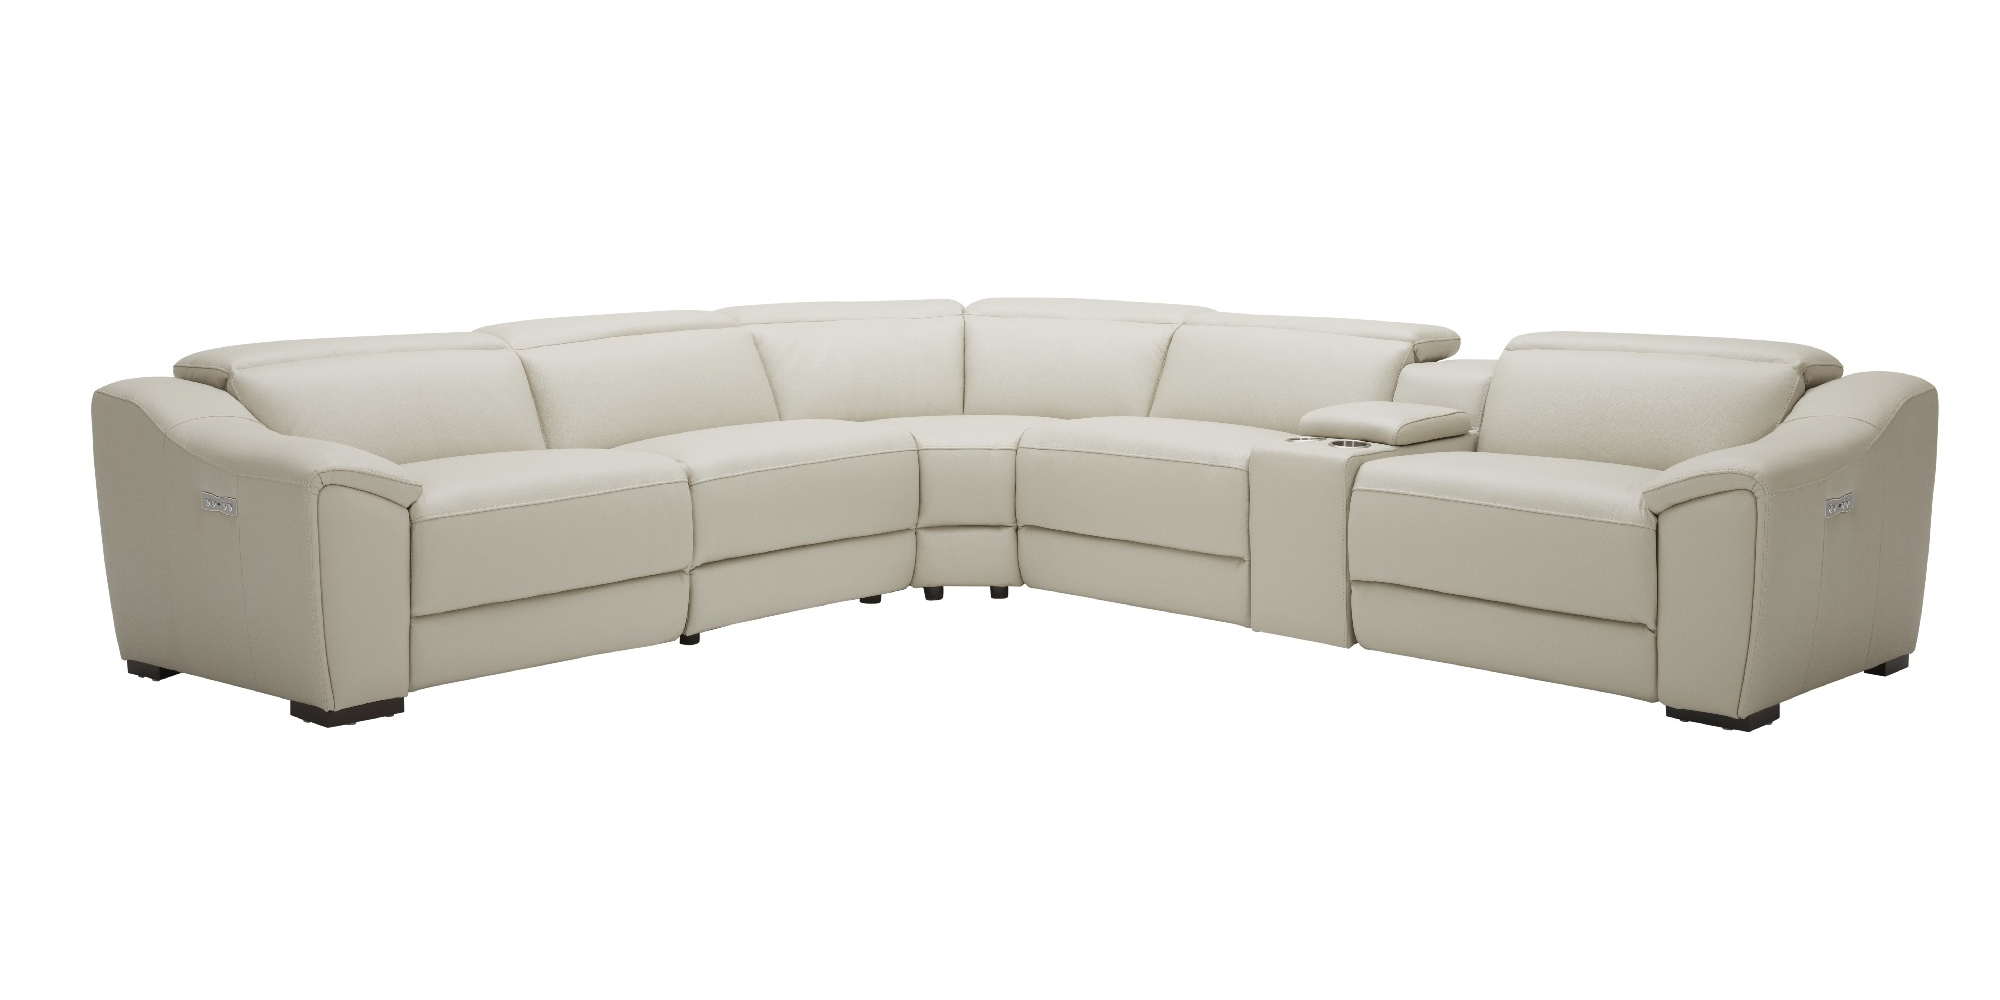 High-class Italian Leather Sectional Sofa - Click Image to Close